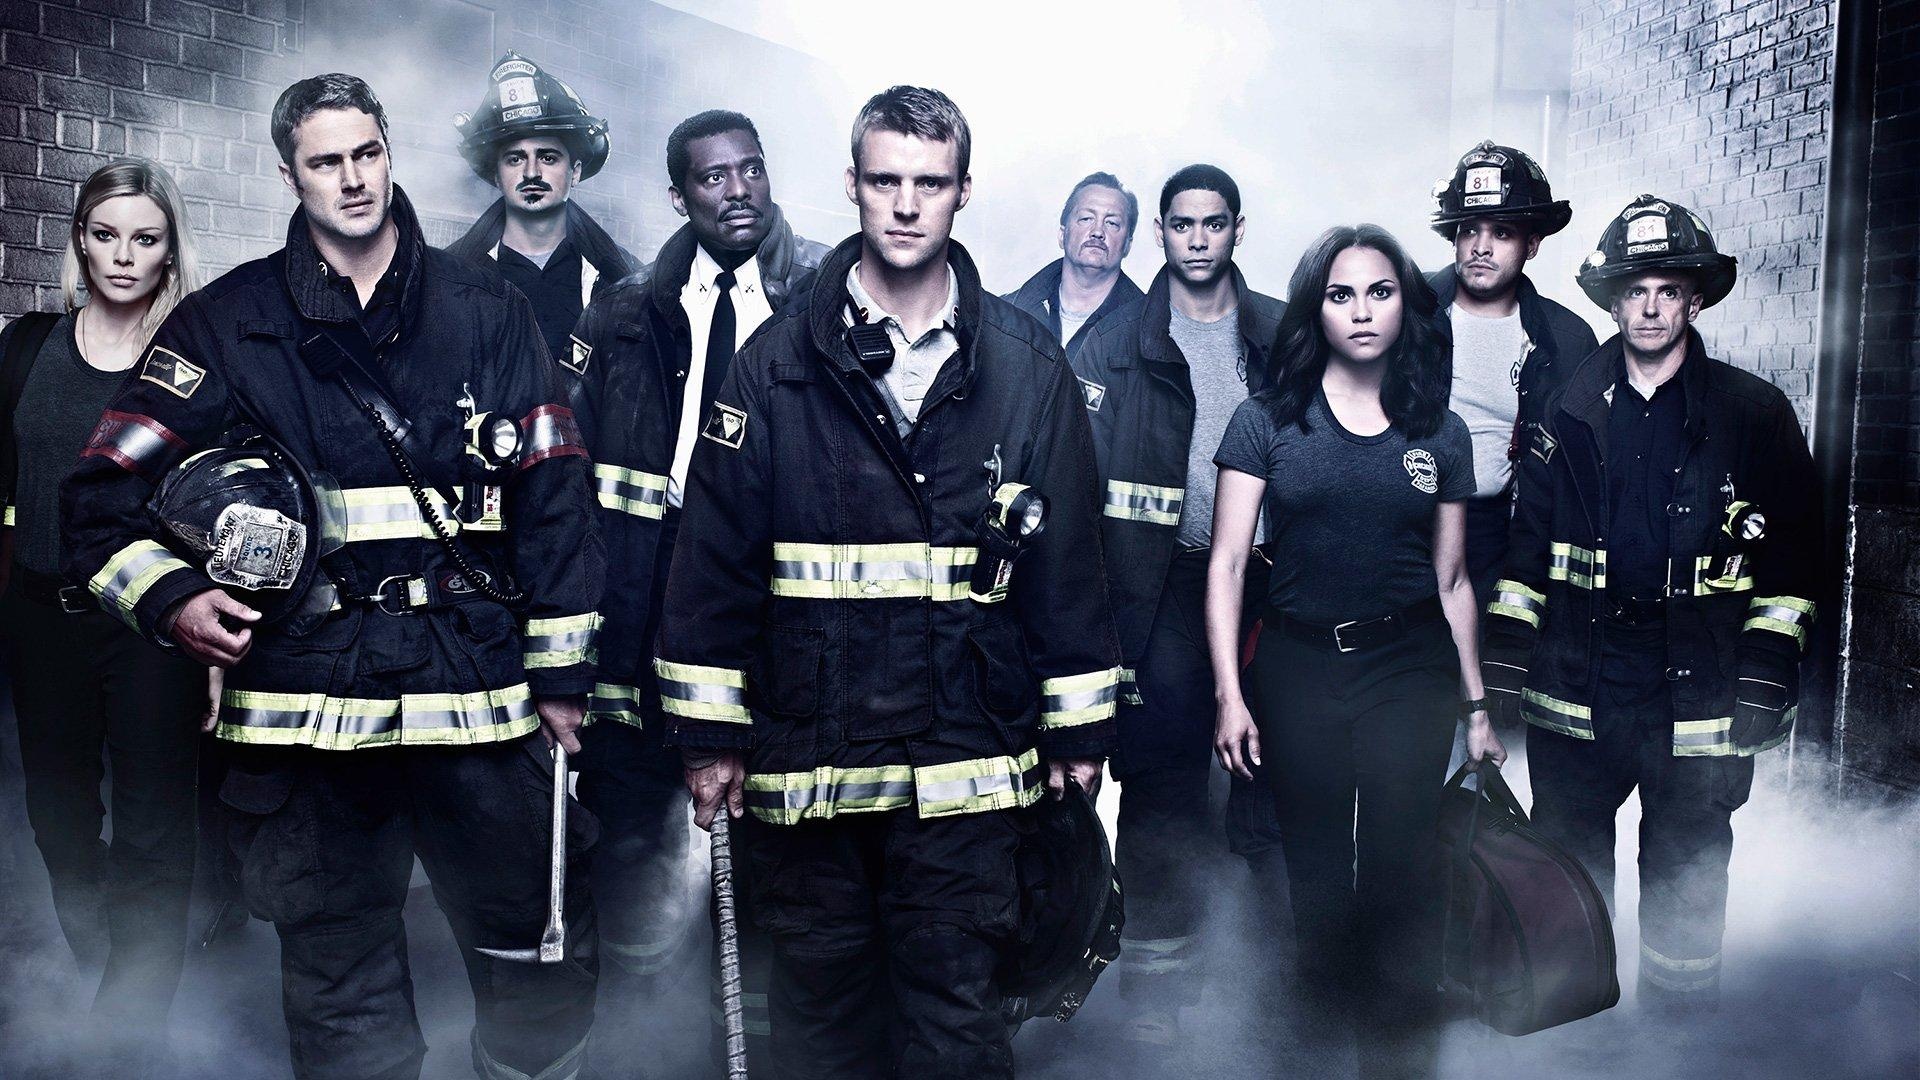 Chicago Fire cast, Firefighter characters, Dramatic storyline, Heroism on screen, 1920x1080 Full HD Desktop